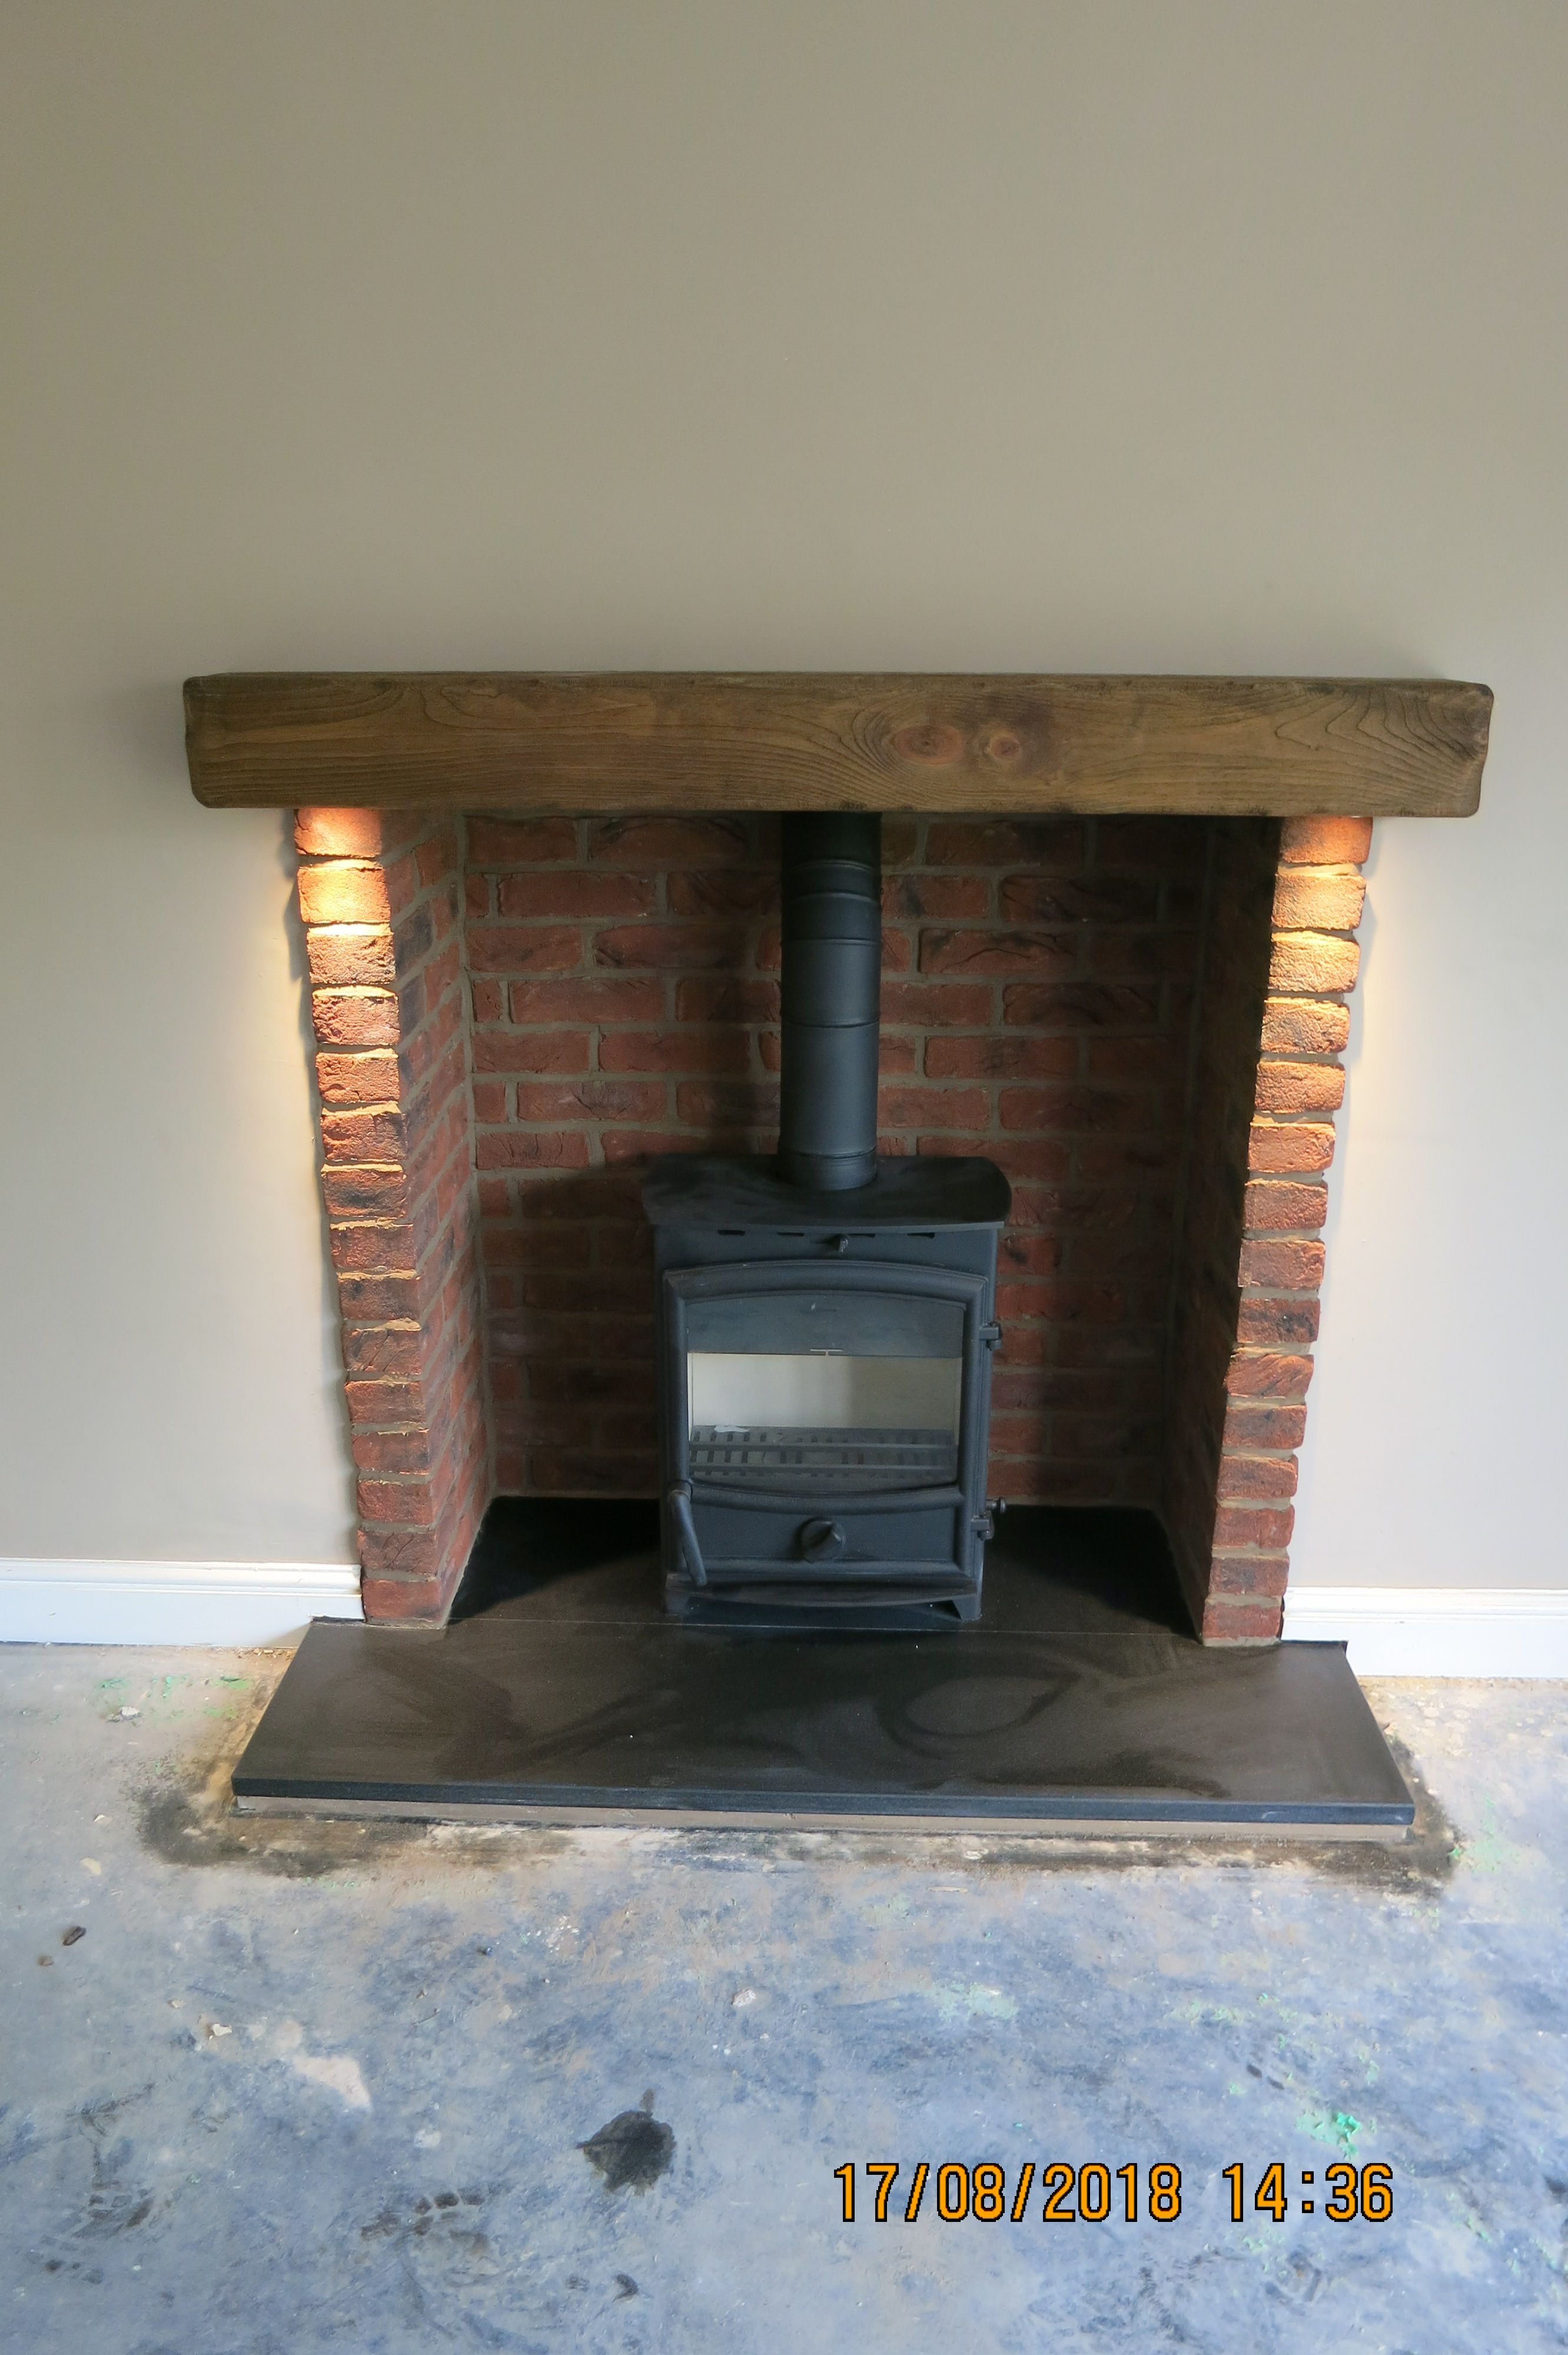 Fireplace and Granite Unique A Fireline Fx5w Multi Fuel Stove Created with A Brick